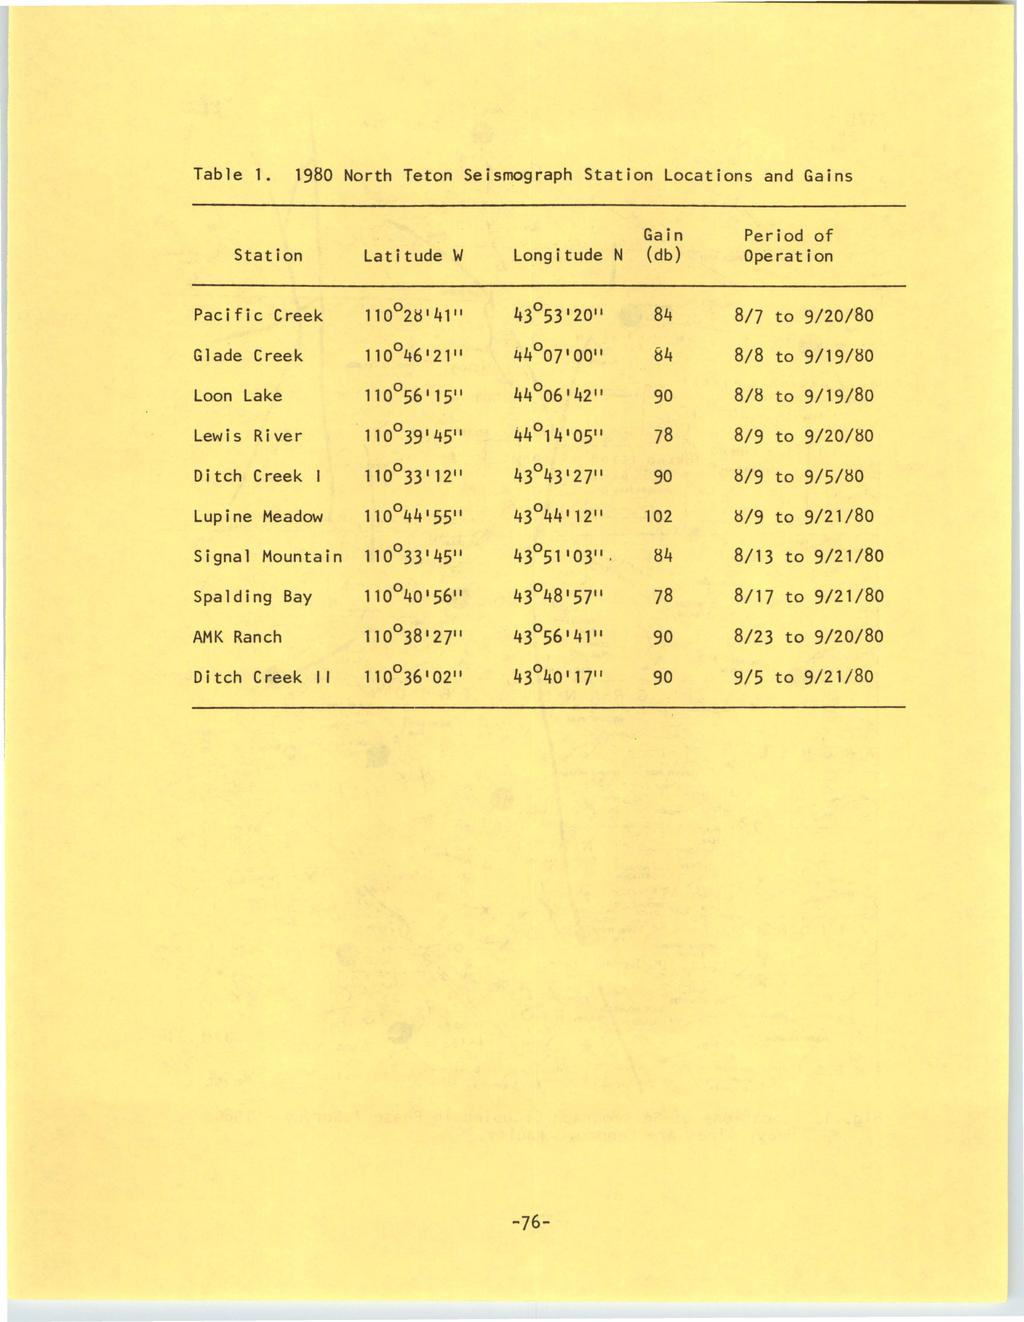 University of Wyoming National Park Service Research Center Annual Report, Vol. 4 [1980], Art. 16 Table 1.